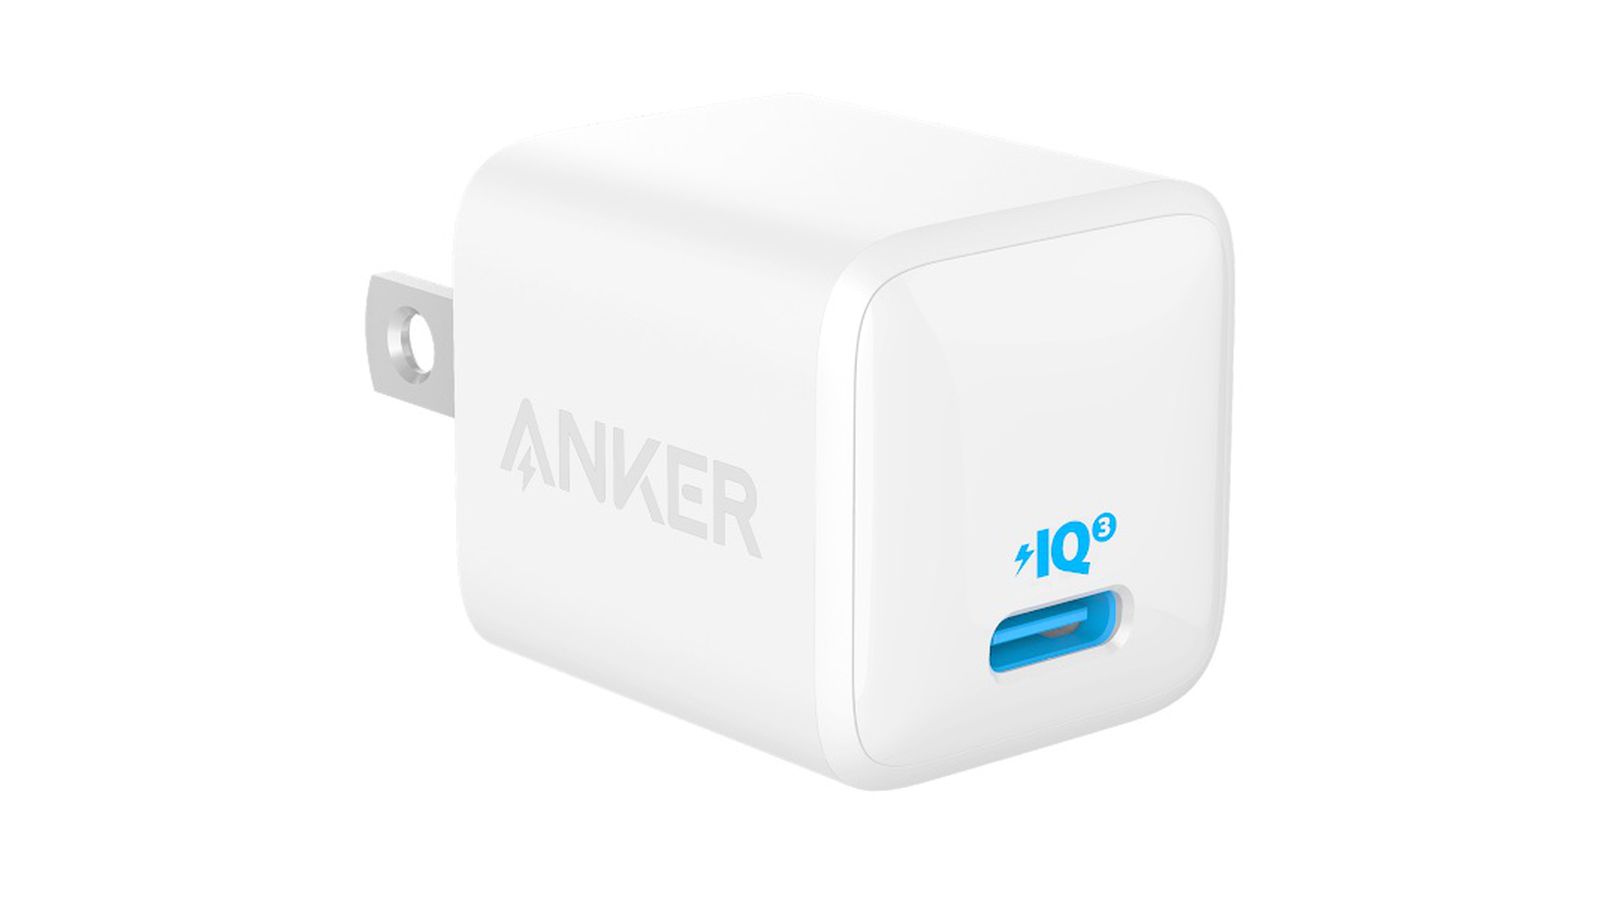 Anker Bumps Its Tiny Anker Nano USB-C Power Adapter Up to 20W